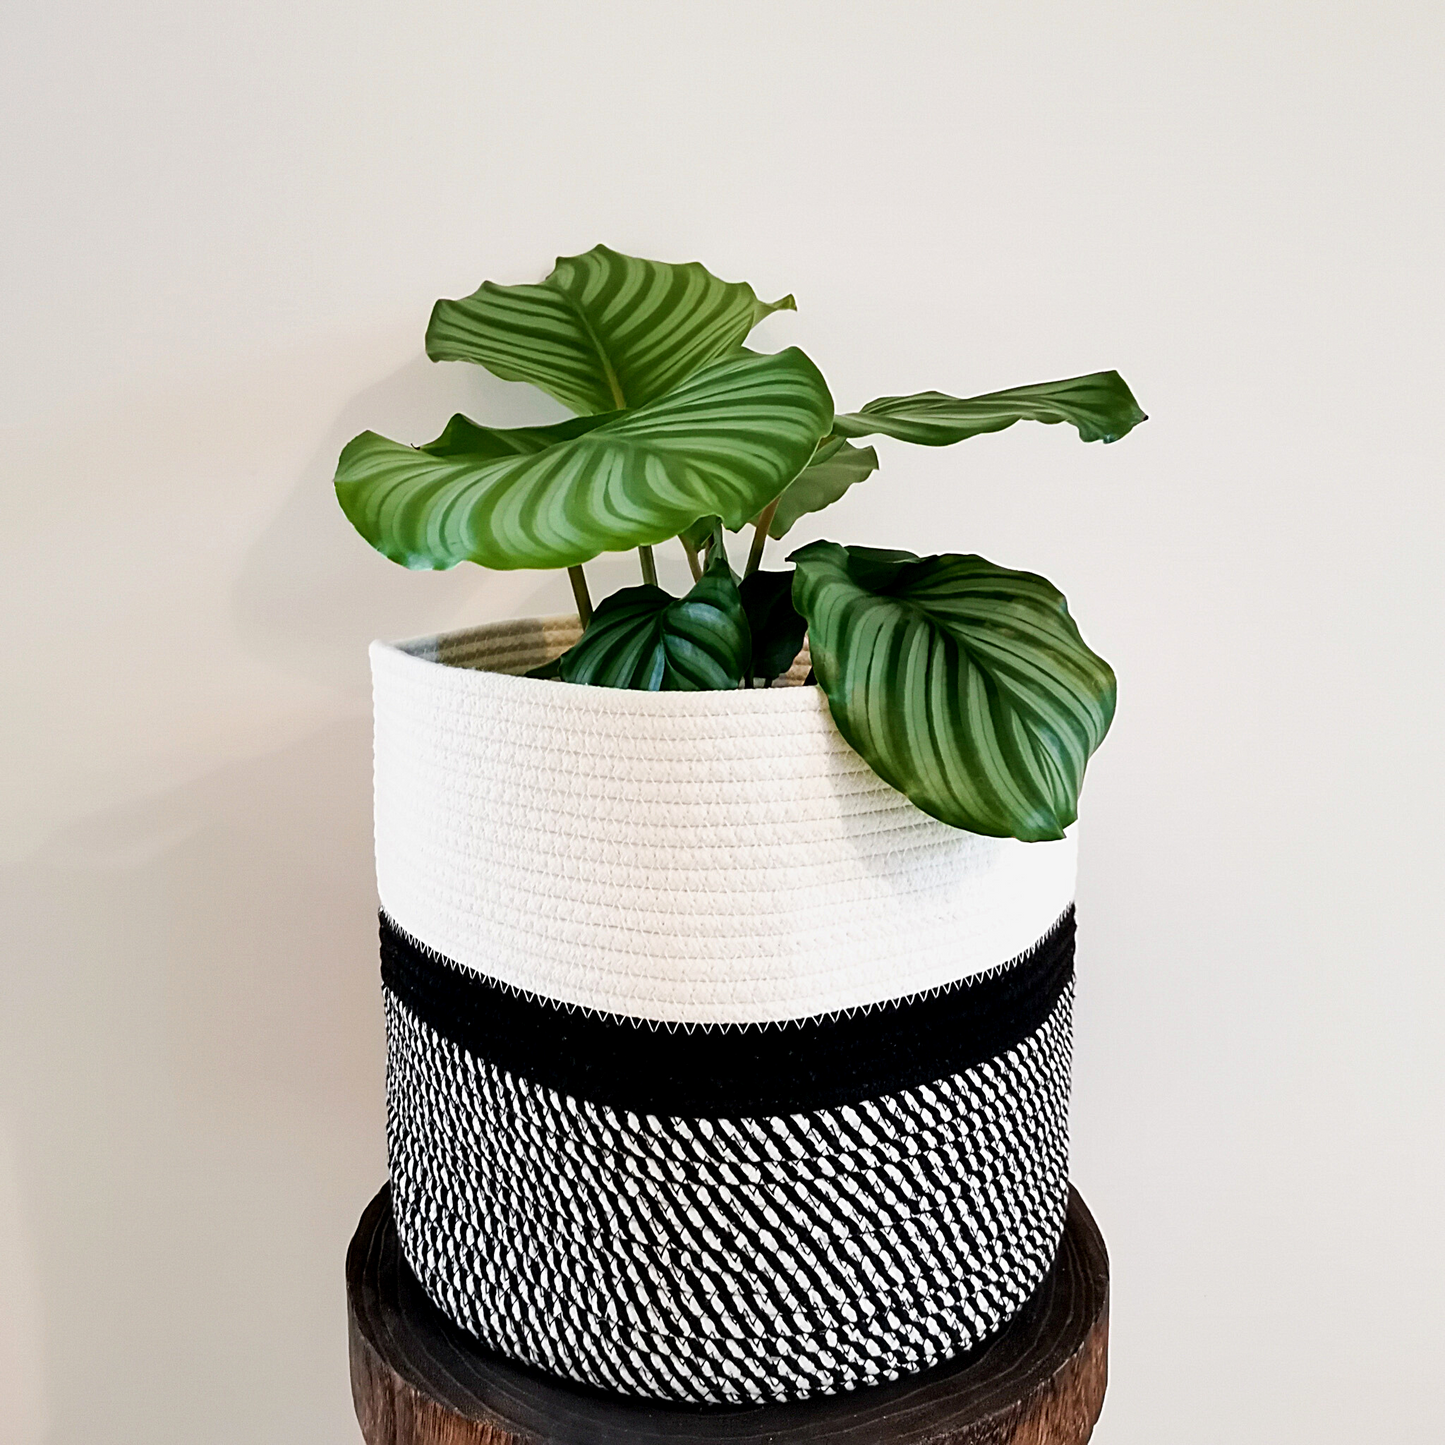 Minimalistic woven cotton basket for plants and for storage.